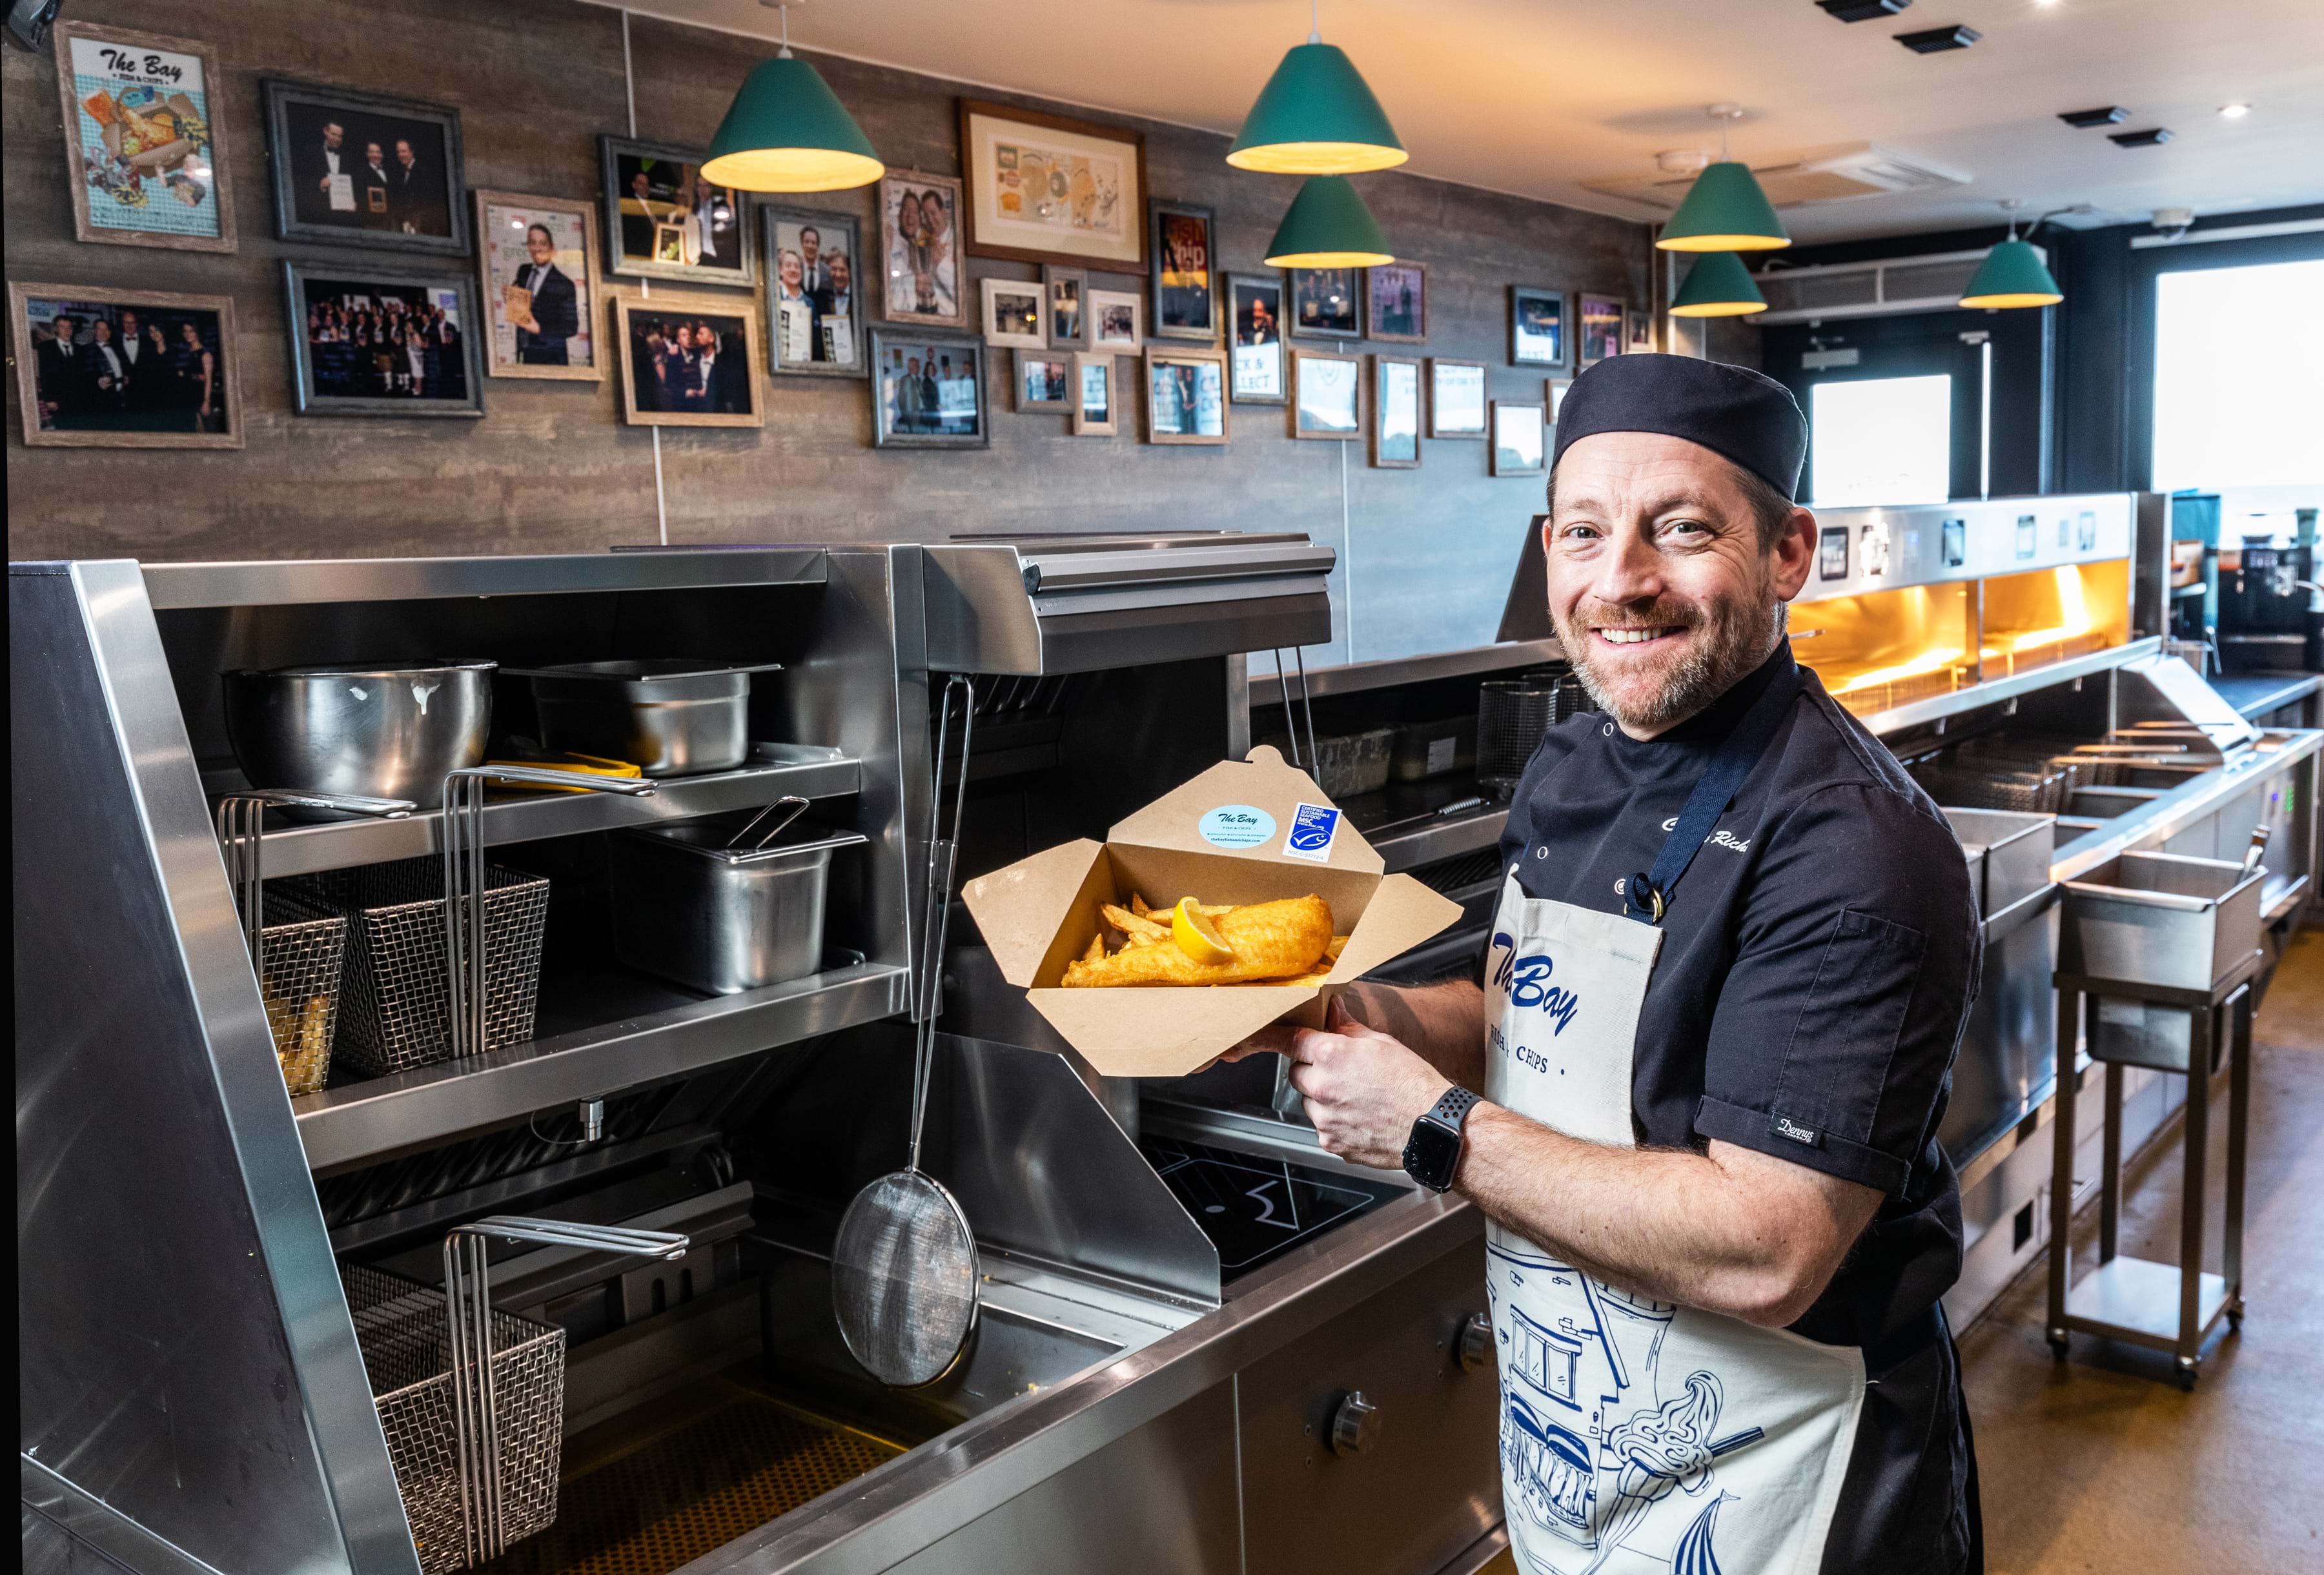 Photo of owner Calum Richardson inside the Bay fish and chip shop